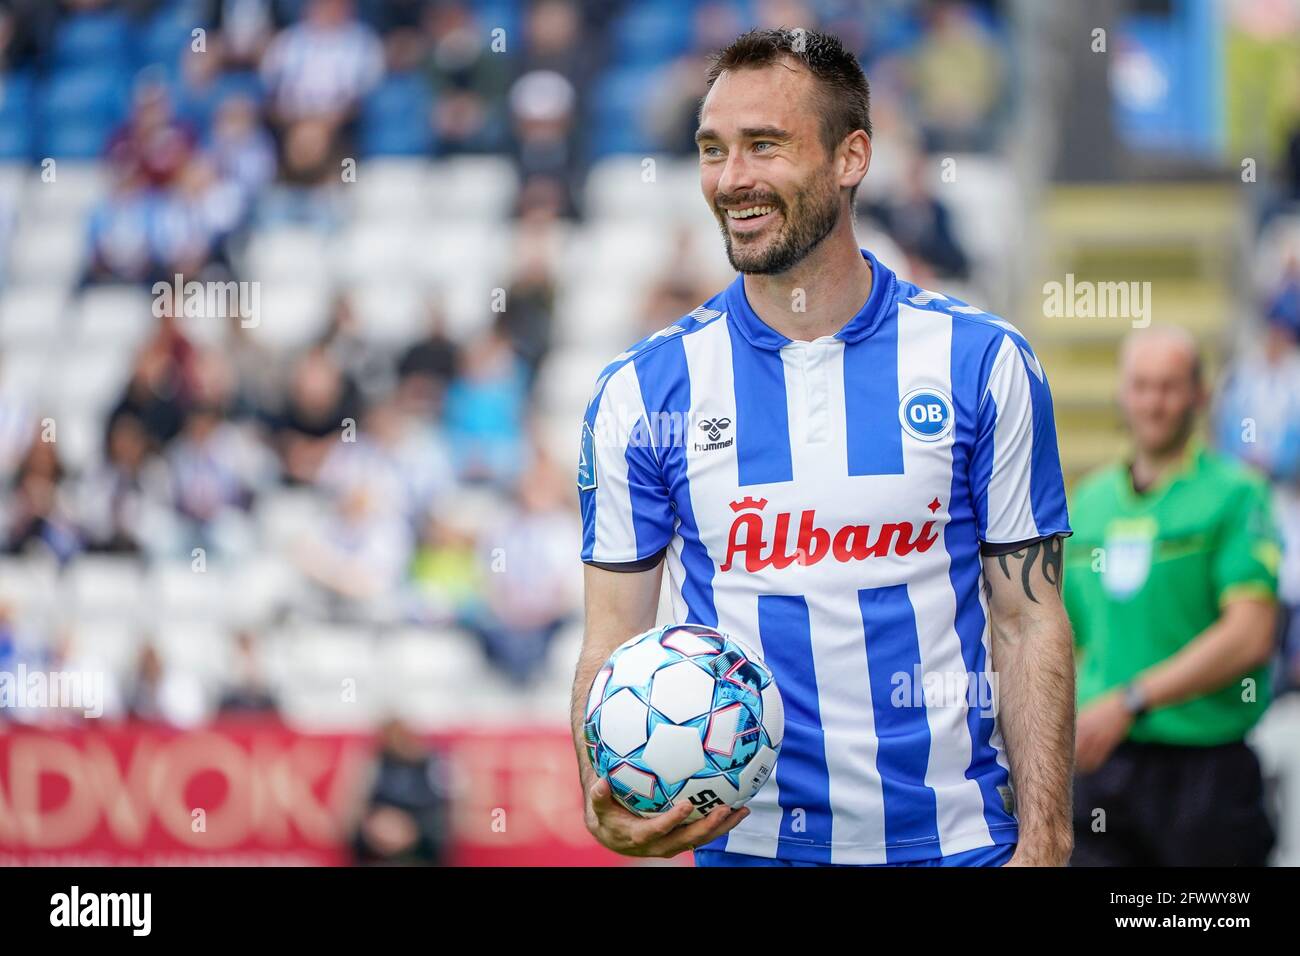 Odense, Denmark. 24th May, 2021. Oliver Lund (2) of OB seen during the 3F  Superliga match between Odense Boldklub and AC Horsens at Nature Energy  Park in Odense. (Photo Credit: Gonzales Photo/Alamy